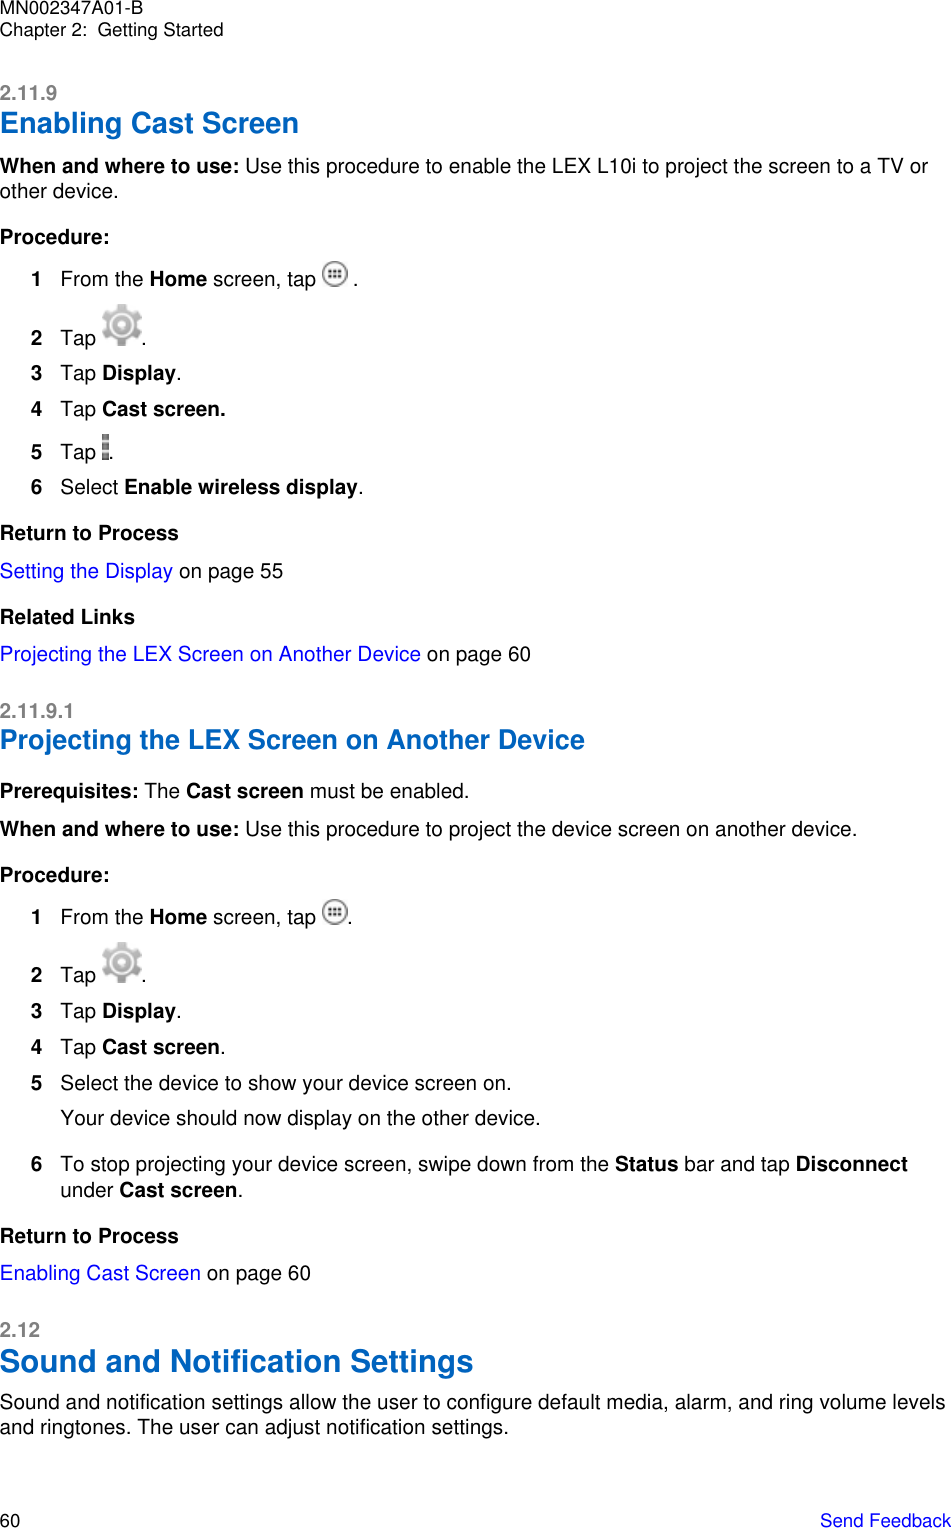 2.11.9Enabling Cast ScreenWhen and where to use: Use this procedure to enable the LEX L10i to project the screen to a TV orother device.Procedure:1From the Home screen, tap   .2Tap  .3Tap Display.4Tap Cast screen.5Tap  .6Select Enable wireless display.Return to ProcessSetting the Display on page 55Related LinksProjecting the LEX Screen on Another Device on page 602.11.9.1Projecting the LEX Screen on Another DevicePrerequisites: The Cast screen must be enabled.When and where to use: Use this procedure to project the device screen on another device.Procedure:1From the Home screen, tap  .2Tap  .3Tap Display.4Tap Cast screen.5Select the device to show your device screen on.Your device should now display on the other device.6To stop projecting your device screen, swipe down from the Status bar and tap Disconnectunder Cast screen.Return to ProcessEnabling Cast Screen on page 602.12Sound and Notification SettingsSound and notification settings allow the user to configure default media, alarm, and ring volume levelsand ringtones. The user can adjust notification settings.MN002347A01-BChapter 2:  Getting Started60   Send Feedback